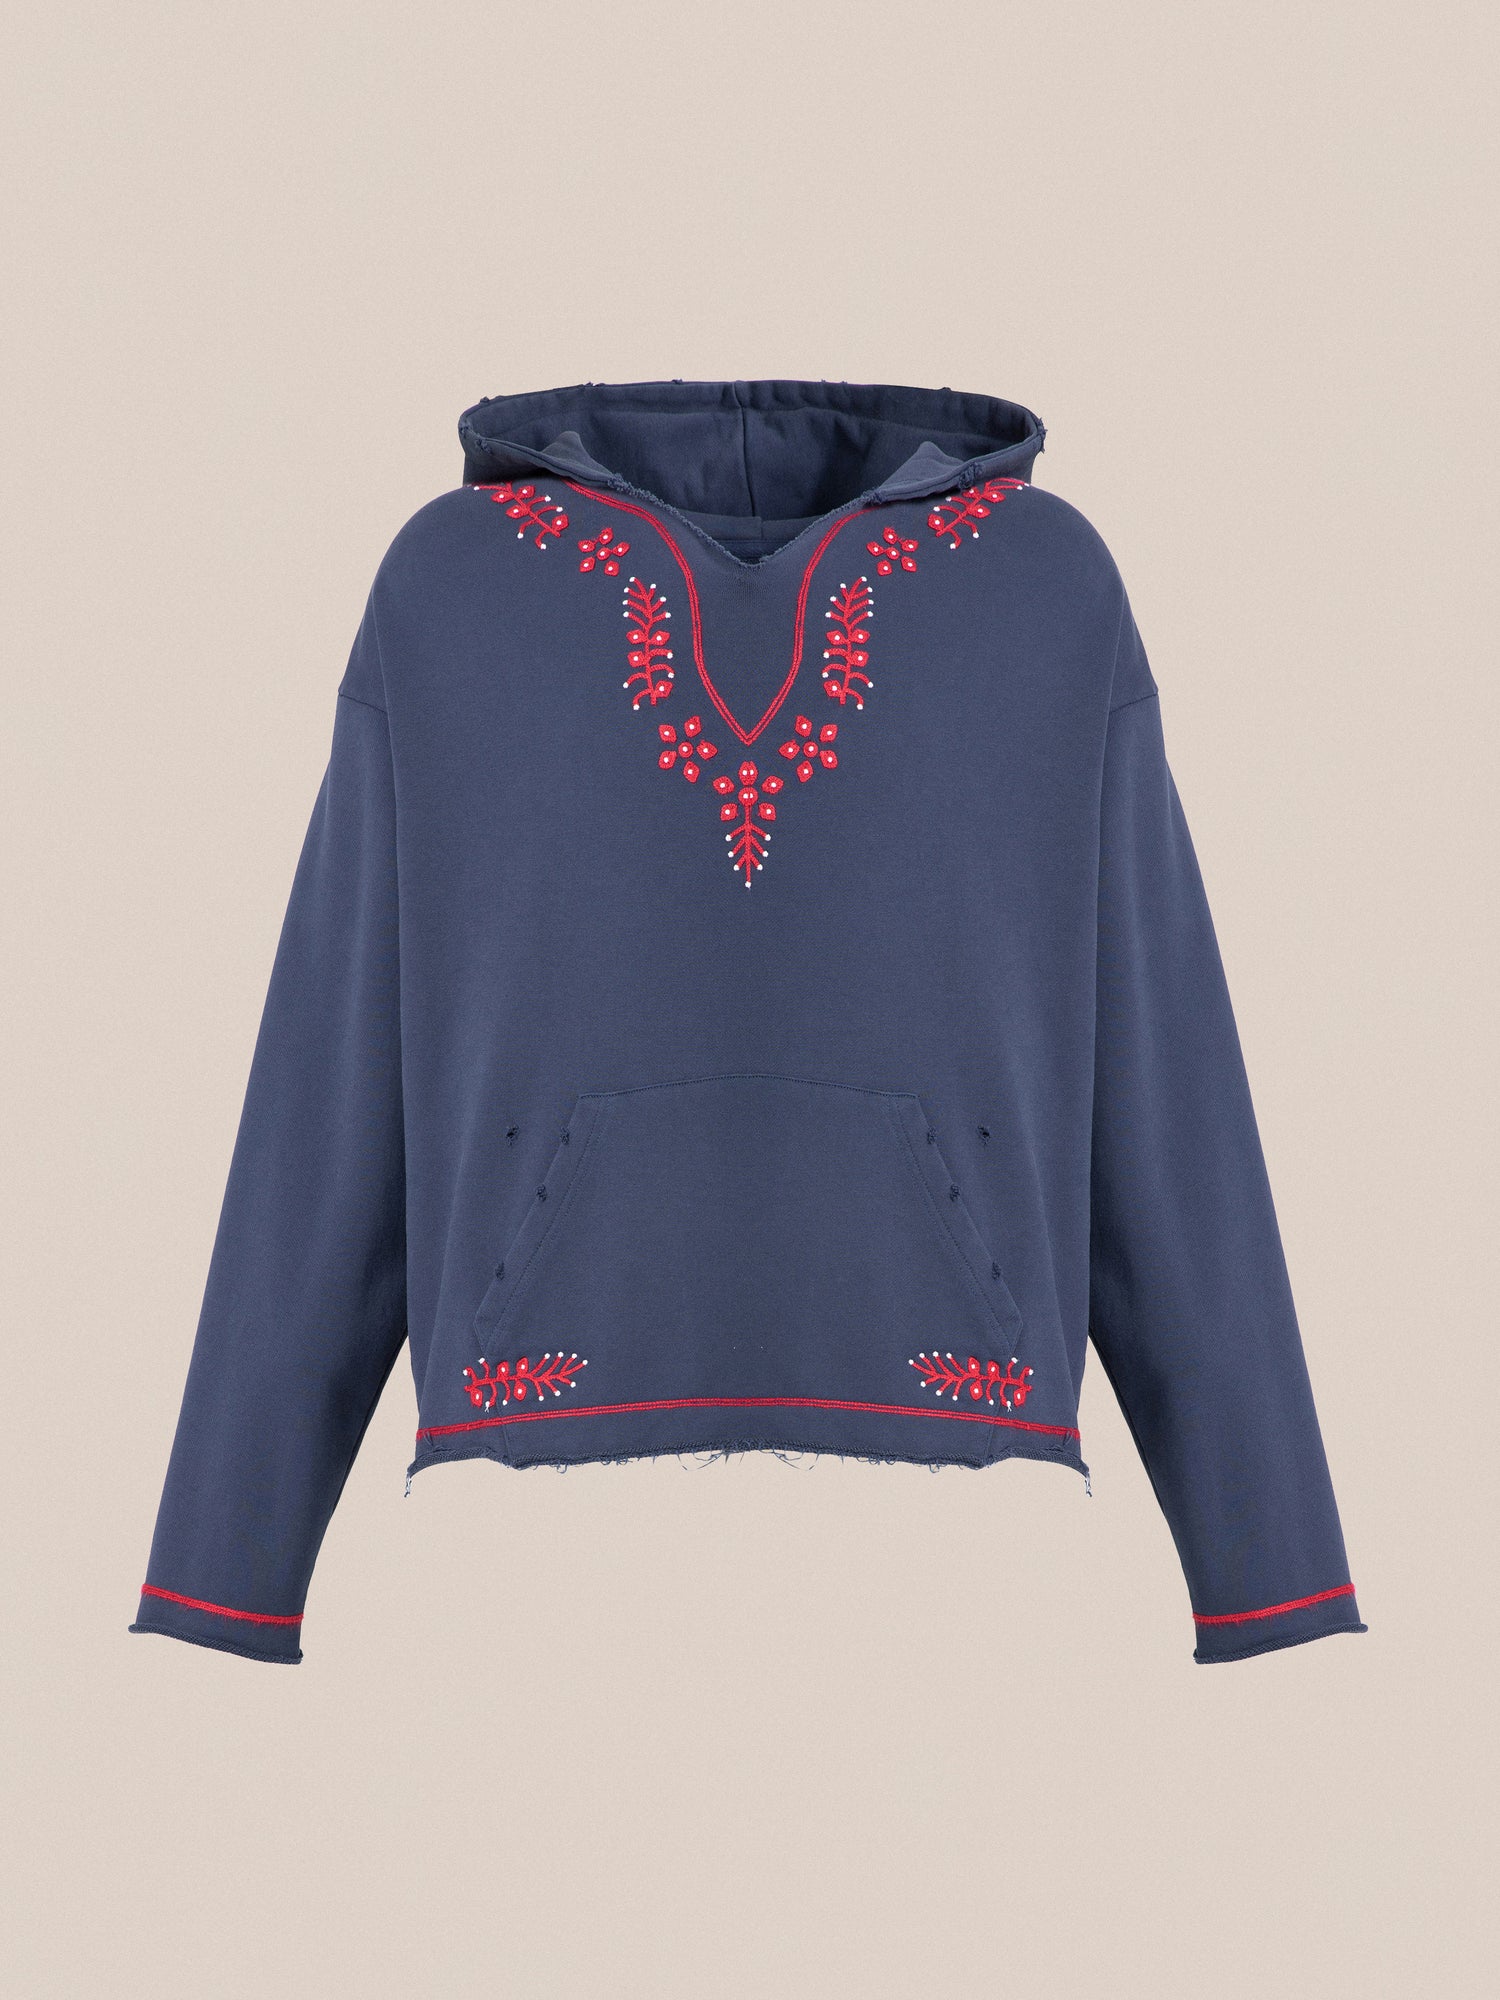 A blue Found Embroidered Hoodie with red Phulkari embroidery details.